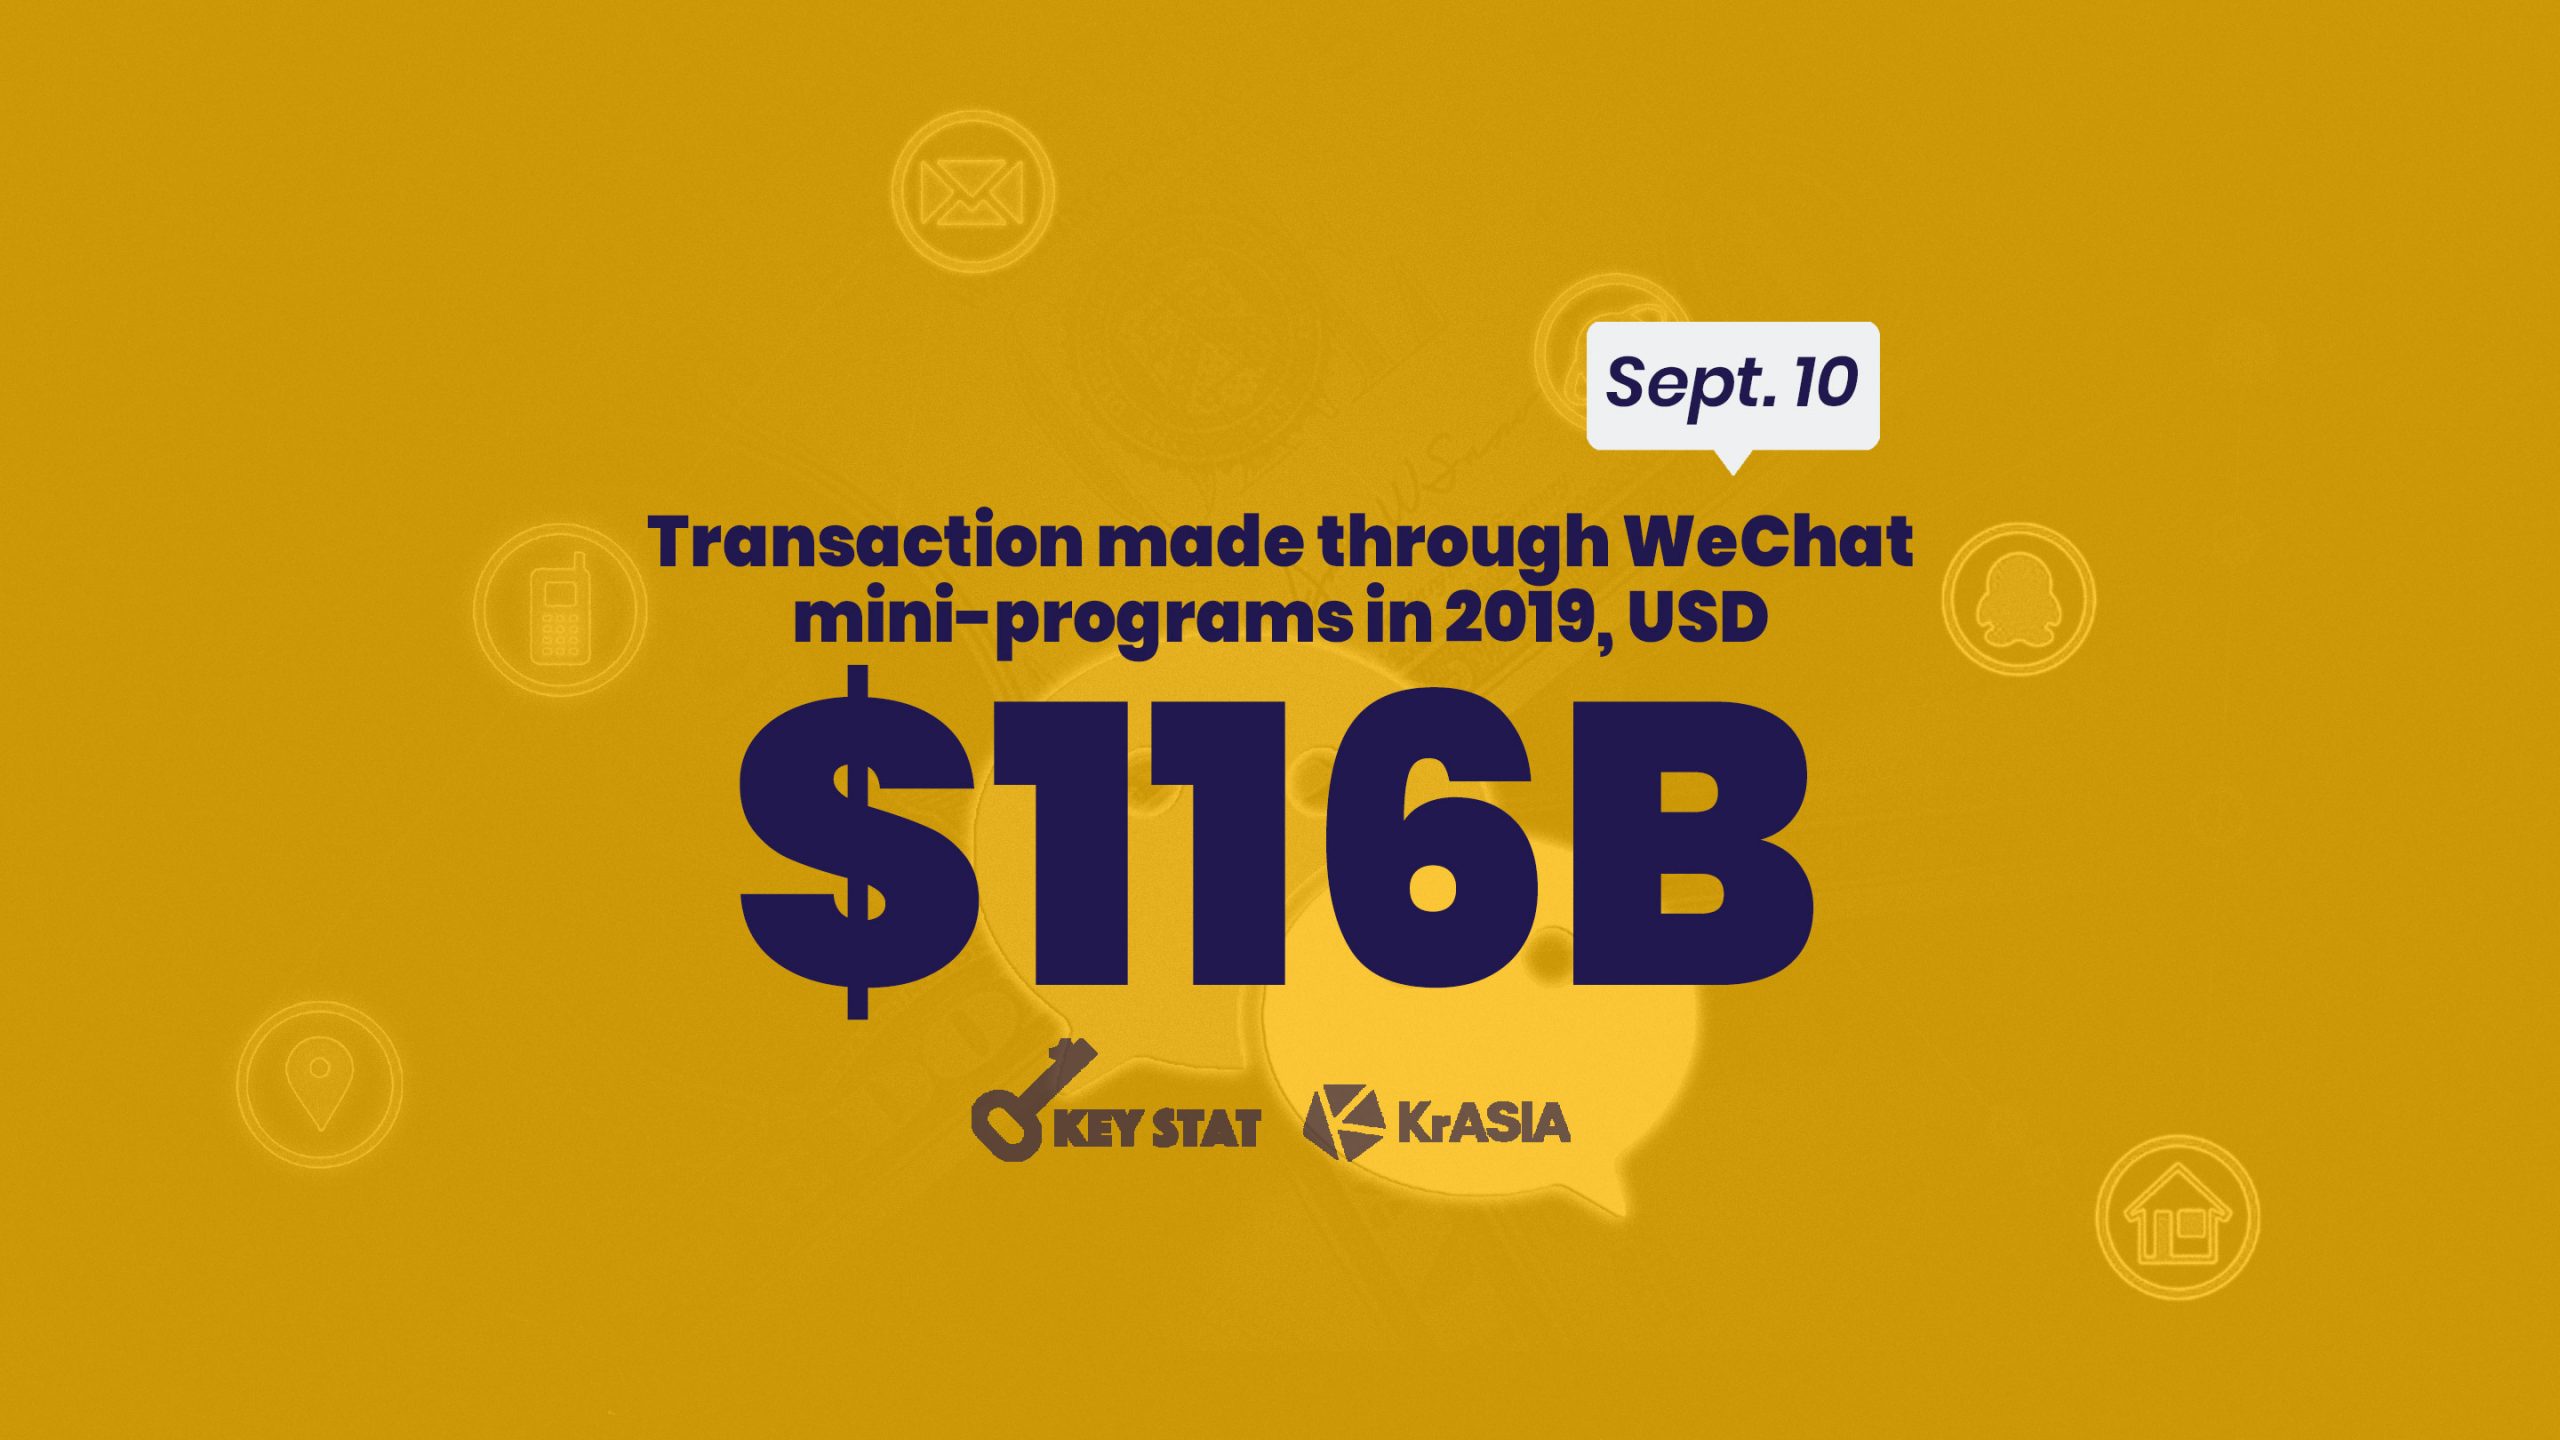 KEY STAT | WeChat mini program overtakes Meituan as fourth largest transaction platform in China